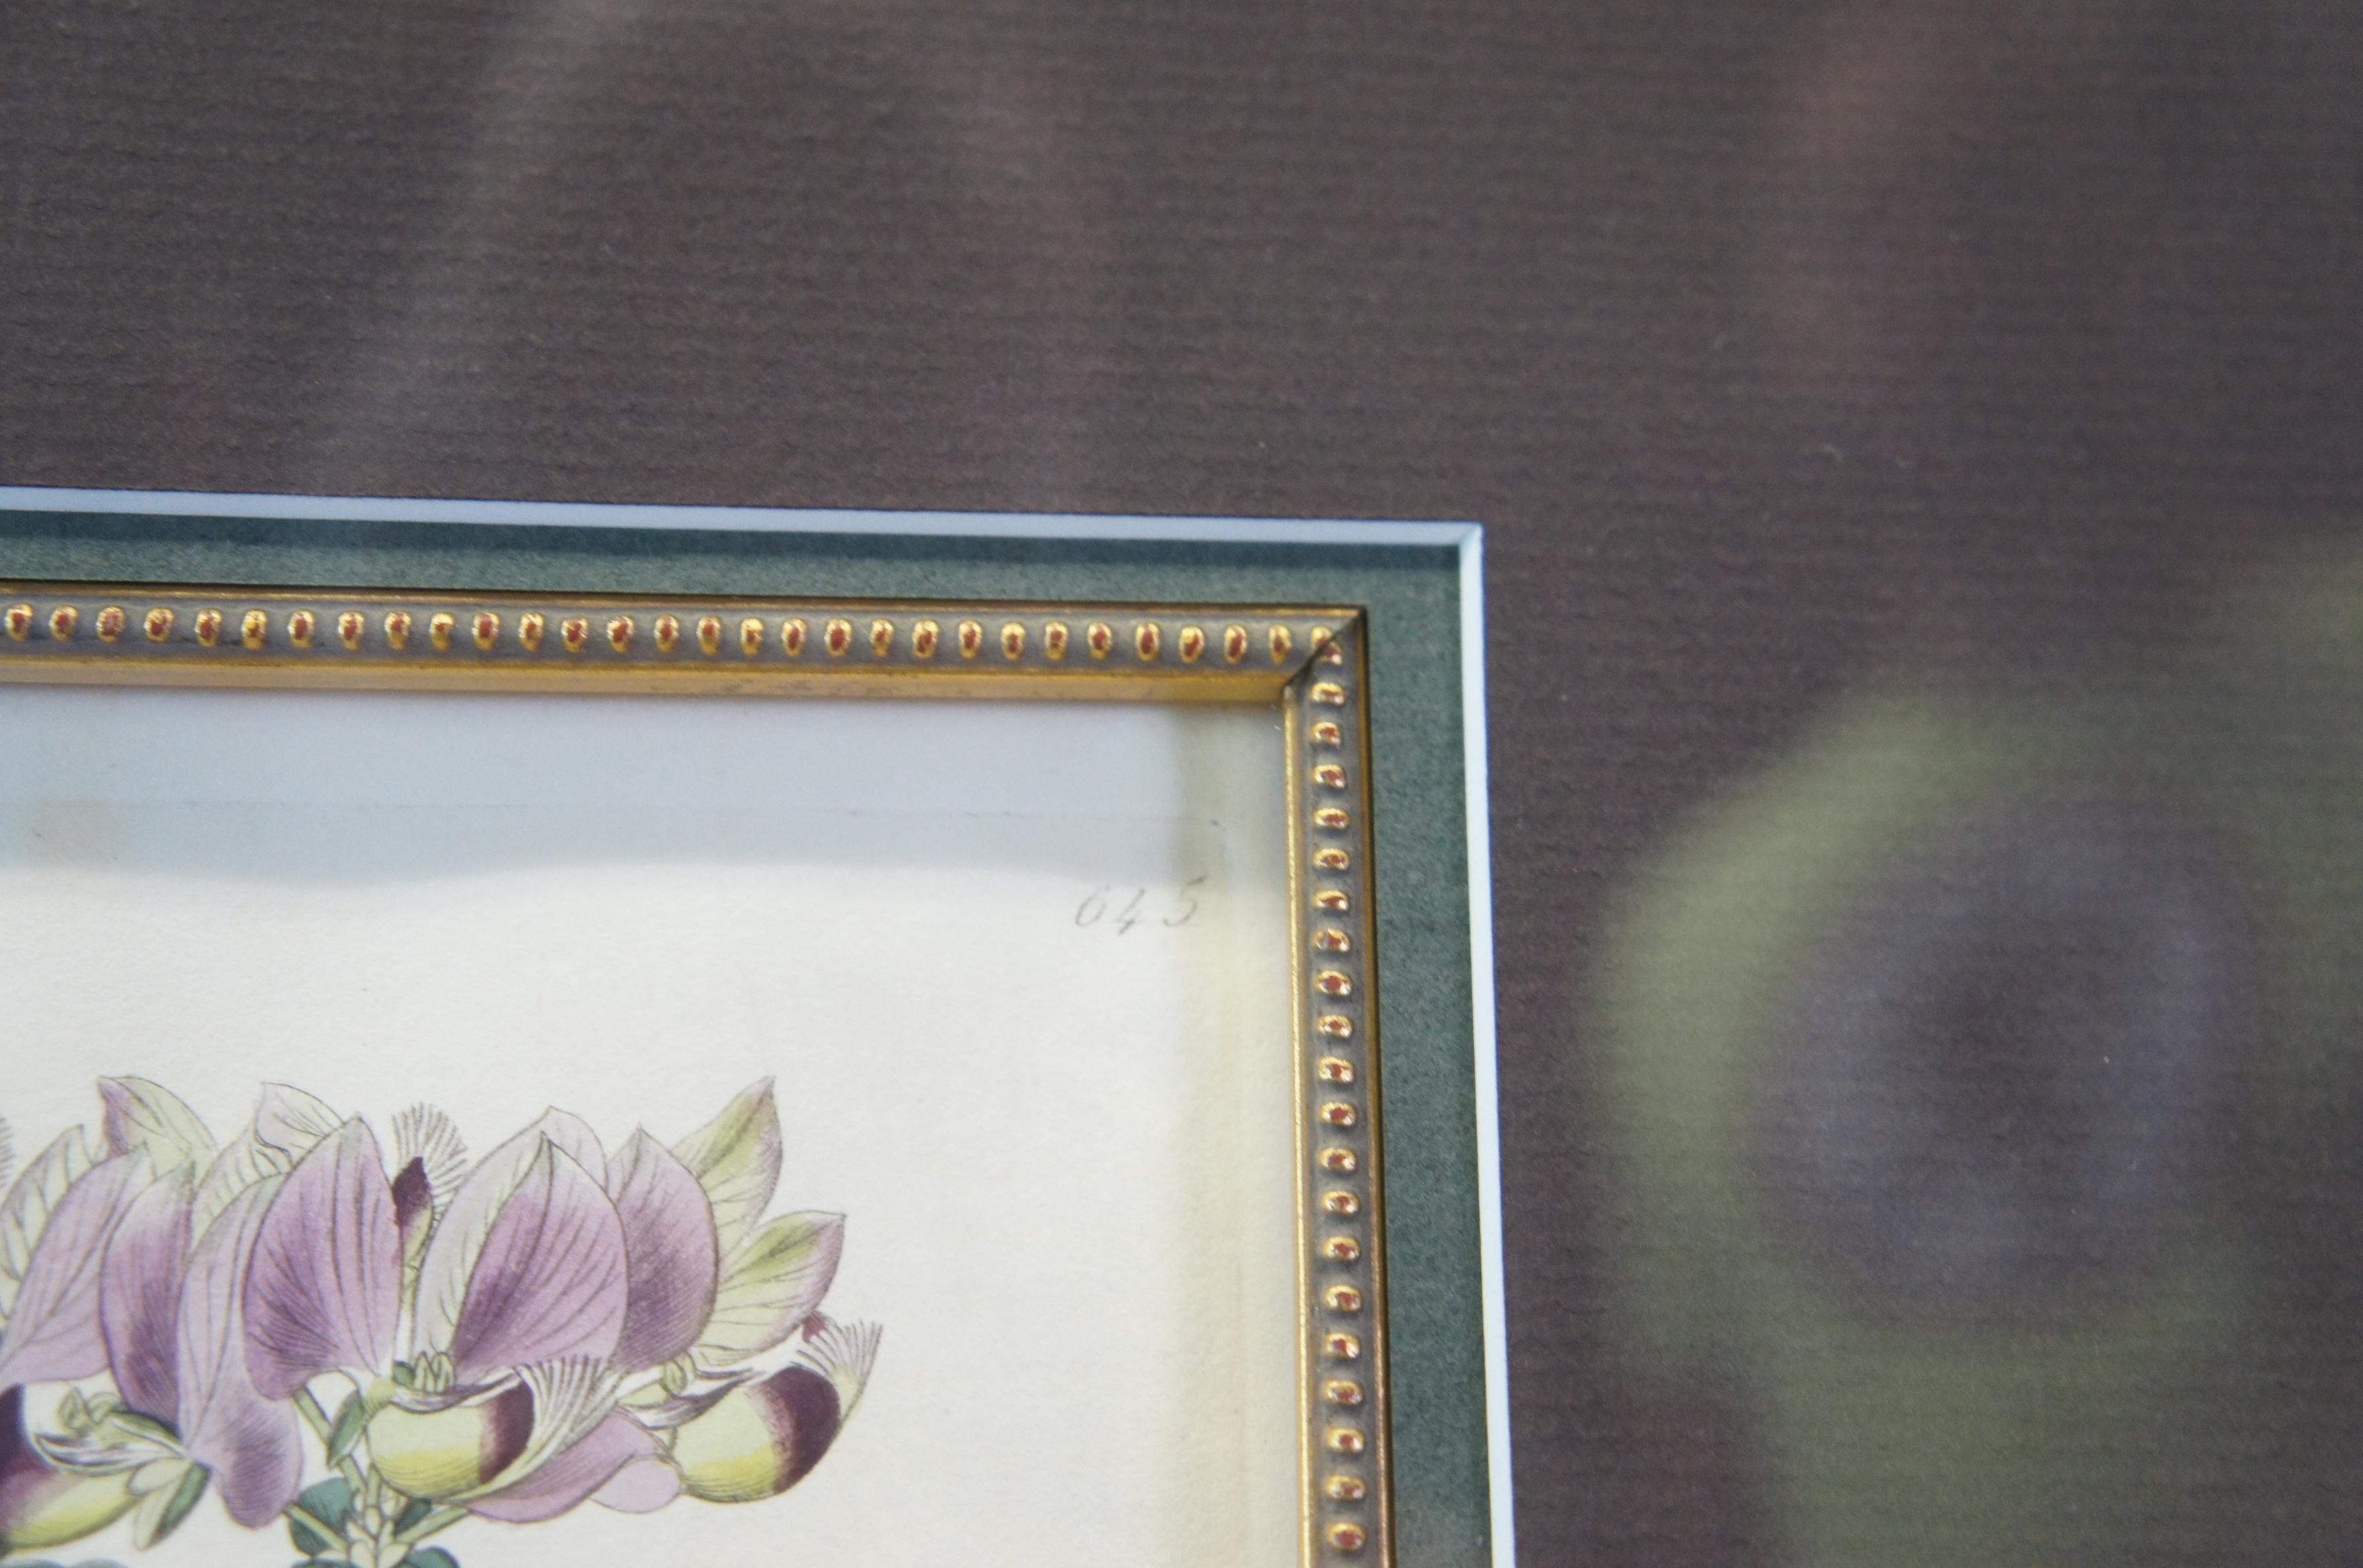 Pair of 19th Century Floral Colored Lithographs Botanical Register Framed 29